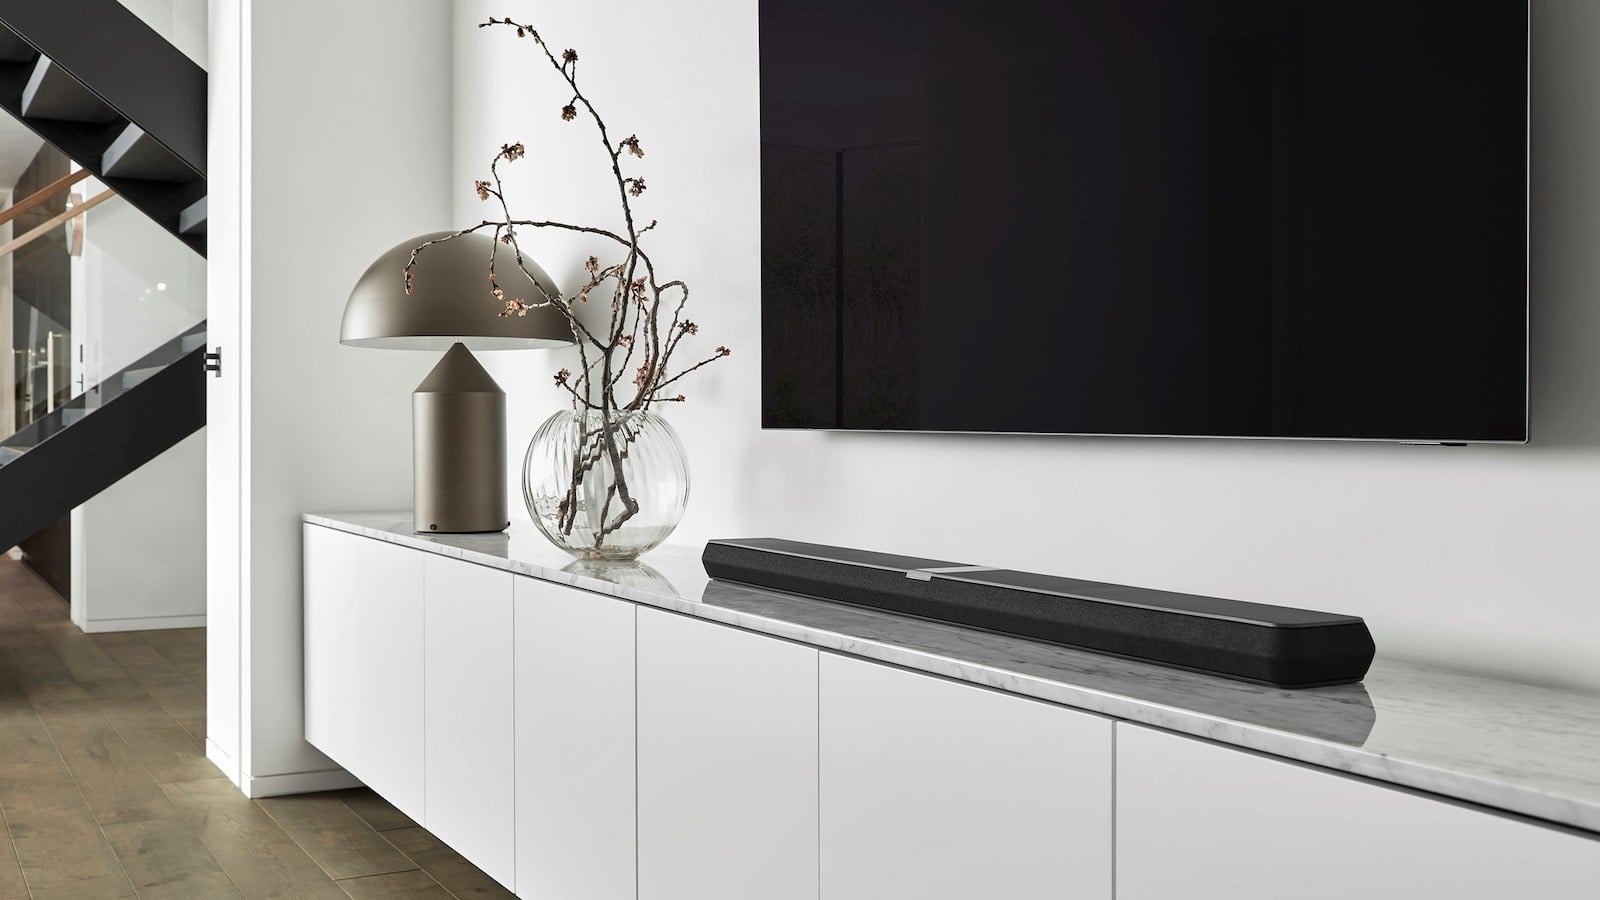 Weekend Digest: Budget-friendly soundbars to uplift the audio quality of your home theater